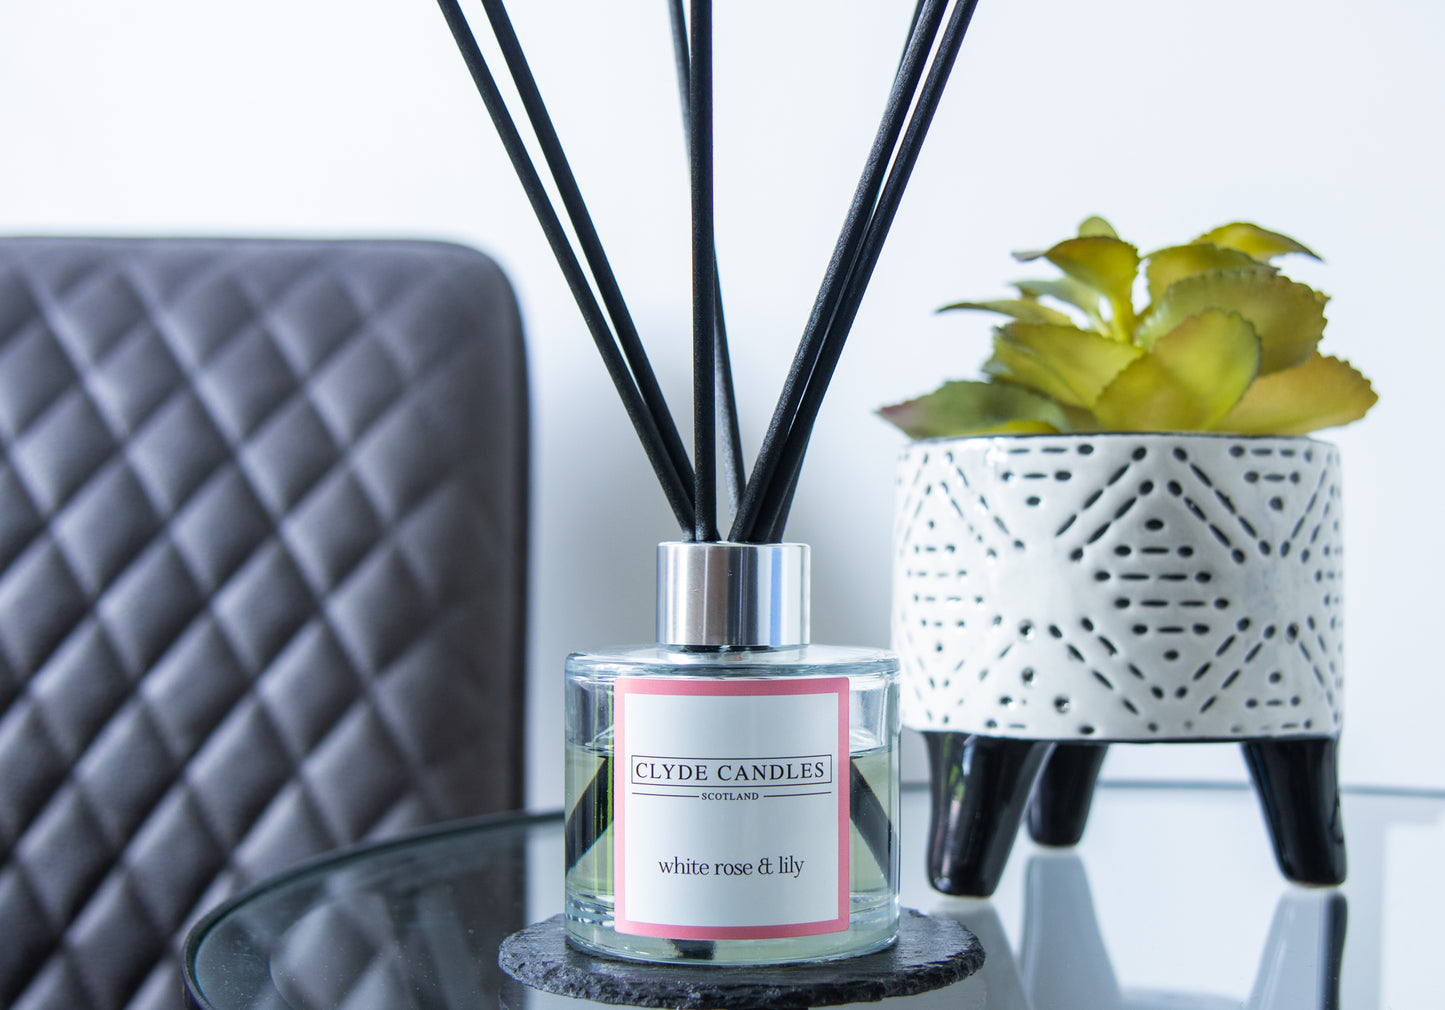 white rose and lily, Reed Diffuser - Clyde Candles, Luxury Diffuser Oil with a Set of 7 Fibre Sticks, 100ml, Best Aroma Scent for Home, Kitchen, Living Room, Bathroom. Fragrance Diffusers set with sticks, fairy dust